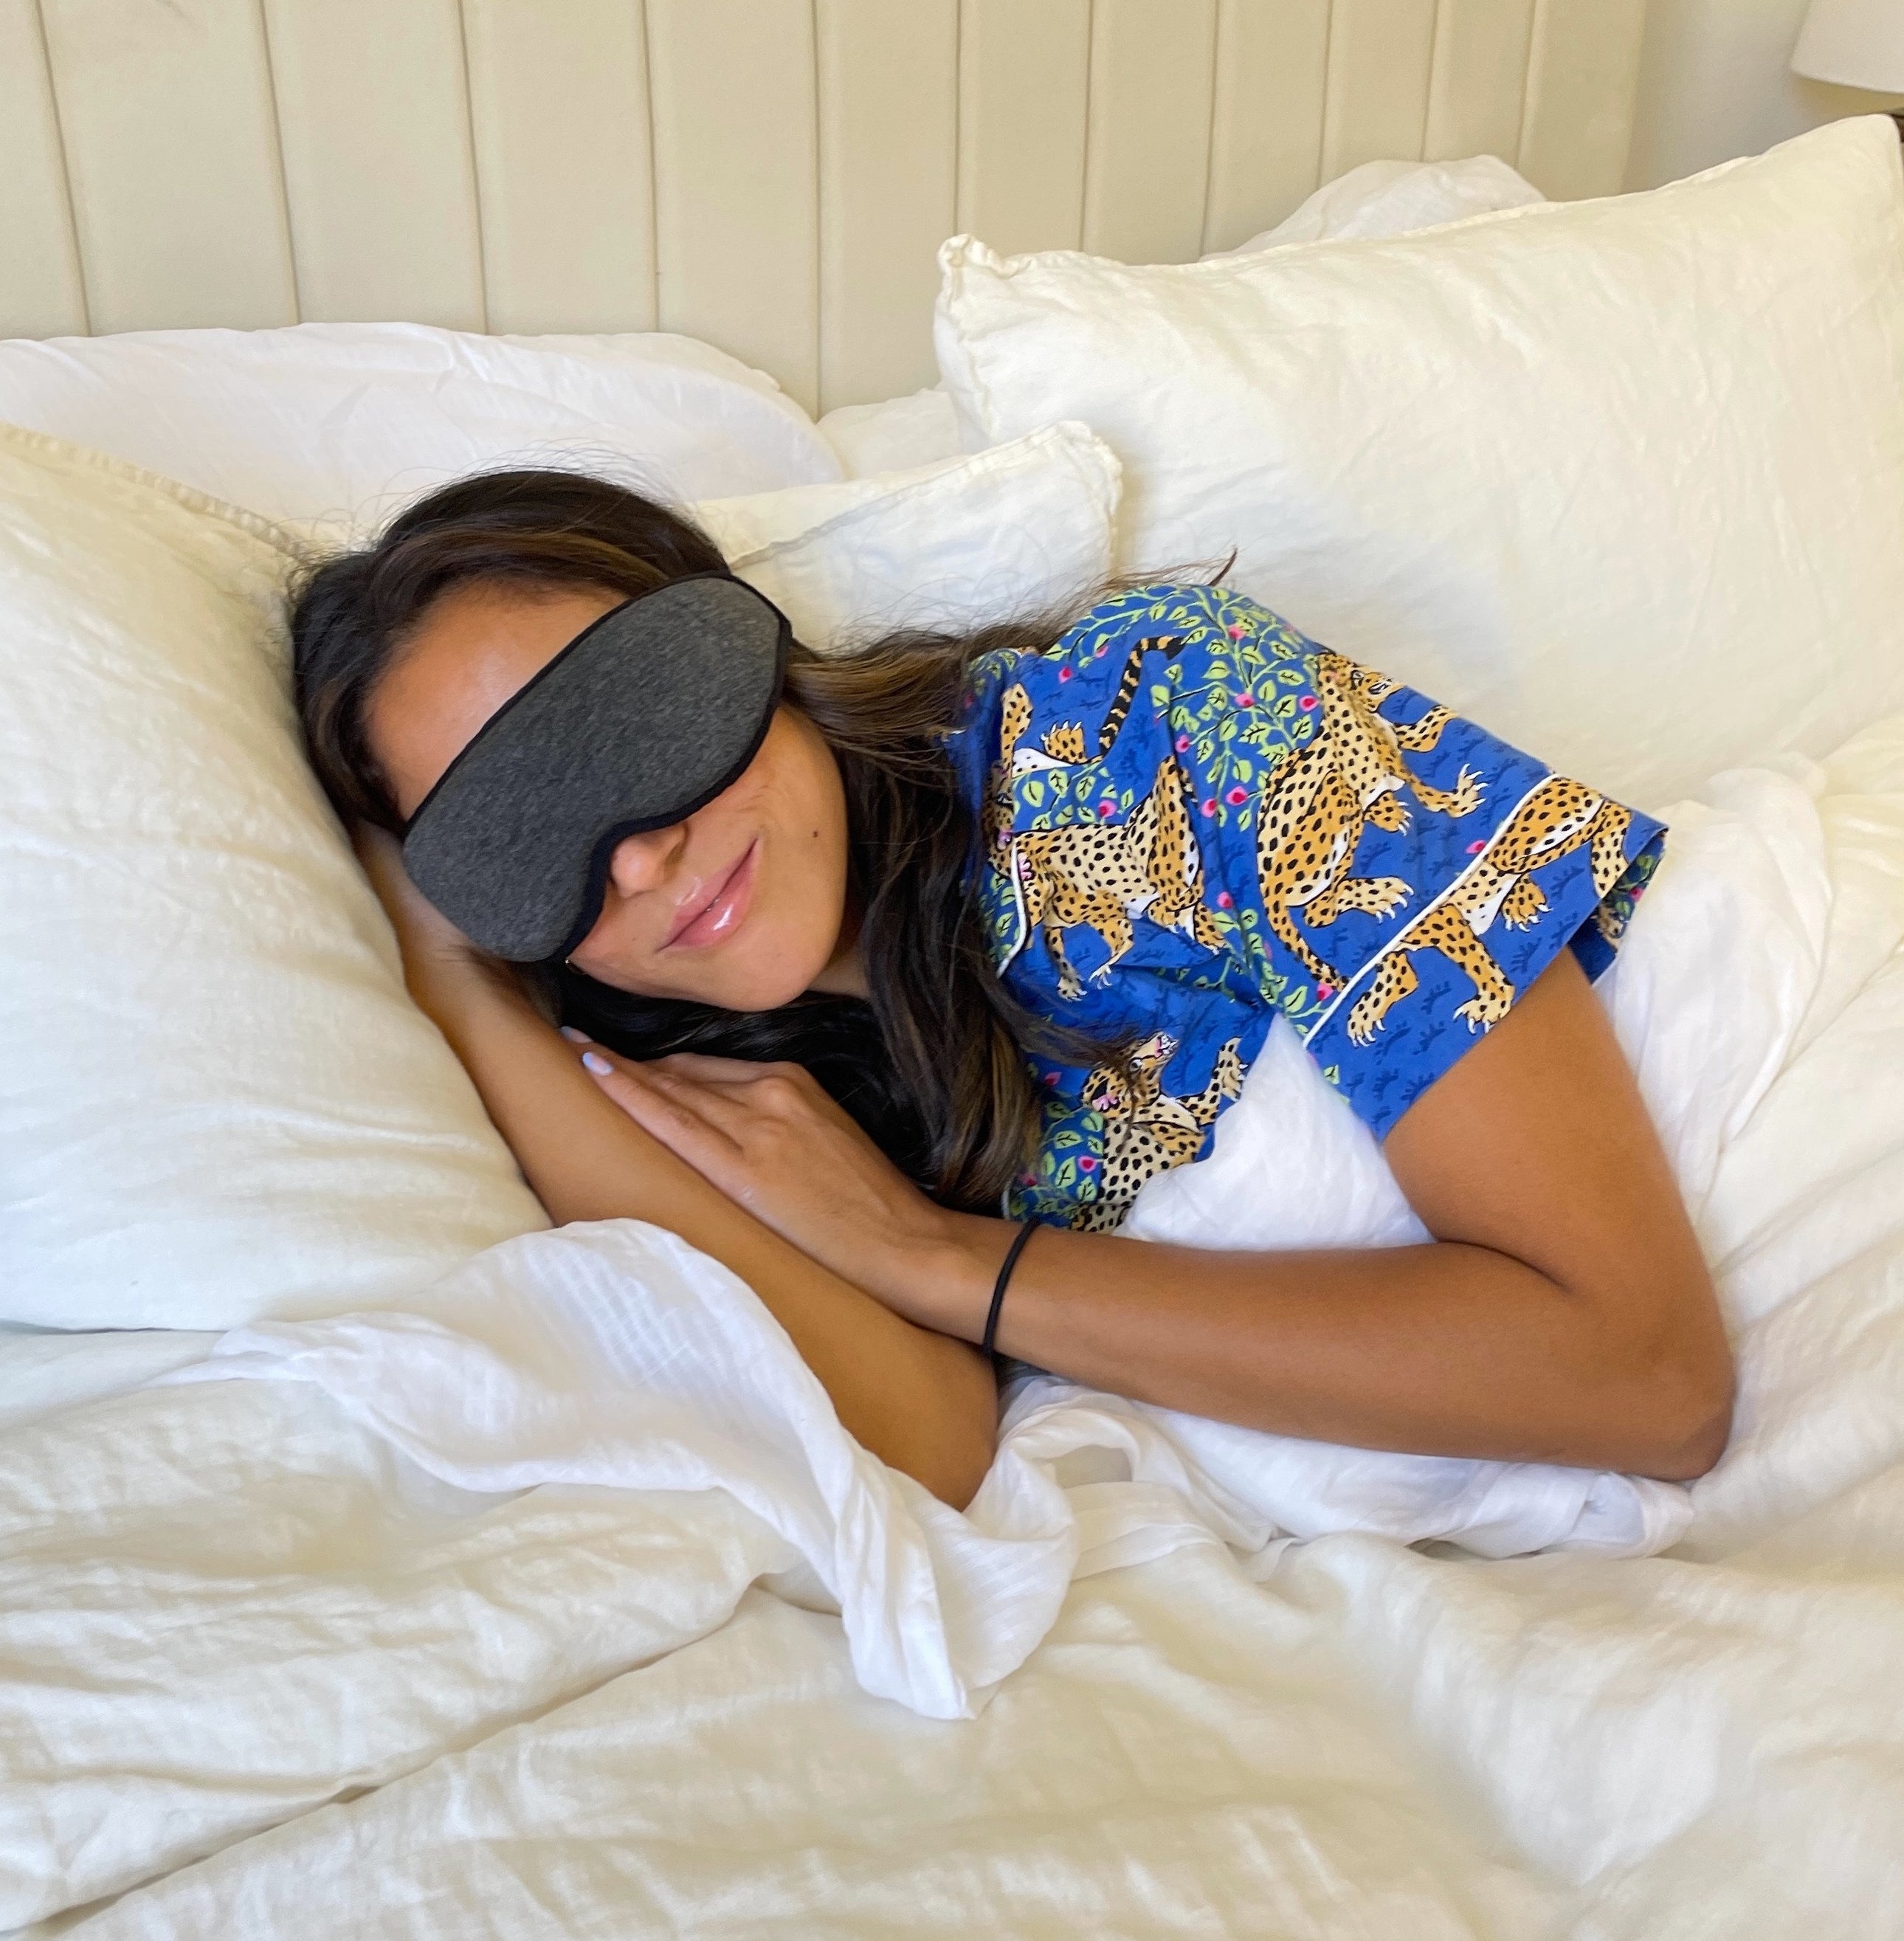 Jasmin in bed wearing the gray mask